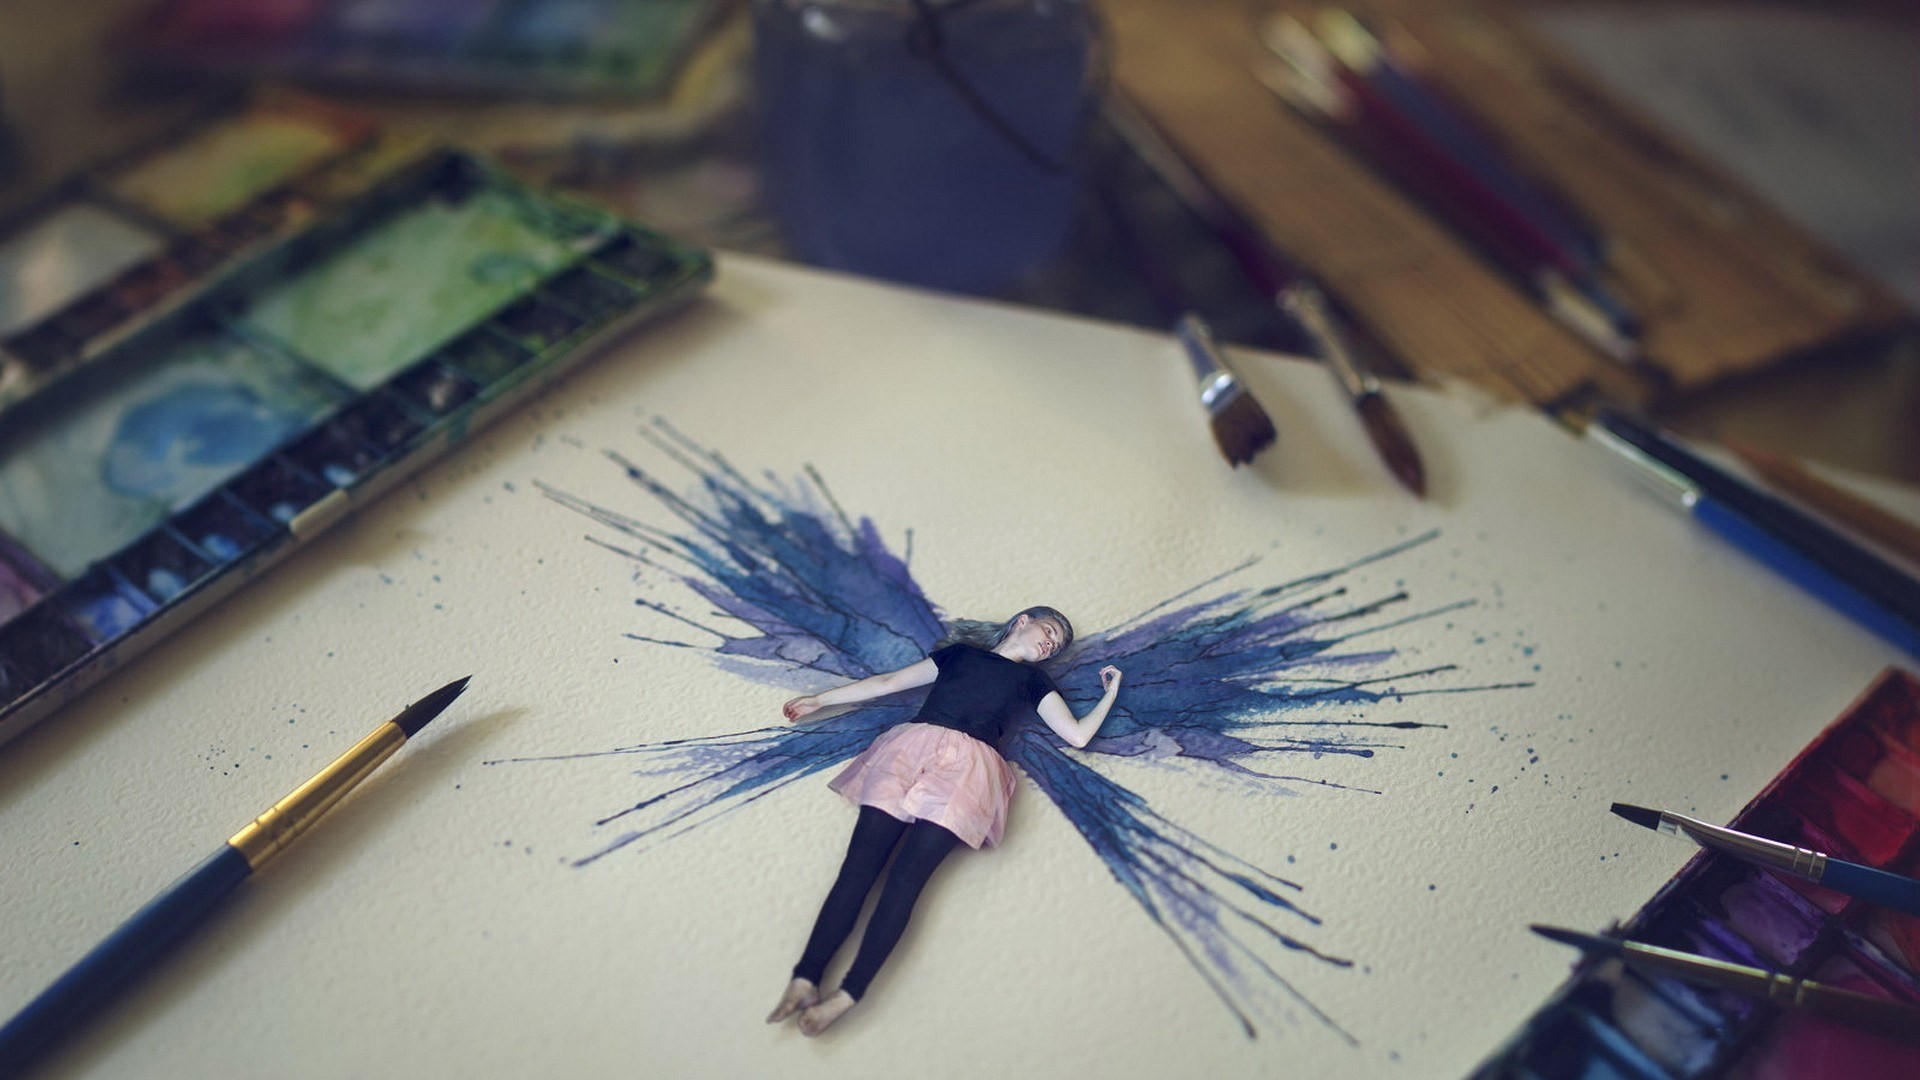 women, Lying on back, Barefoot, Fantasy art, Photo manipulation, Wings, Painting, Paintbrushes, Paper, Colorful, Depth of field, Black tops, Skirt, Miniatures Wallpaper